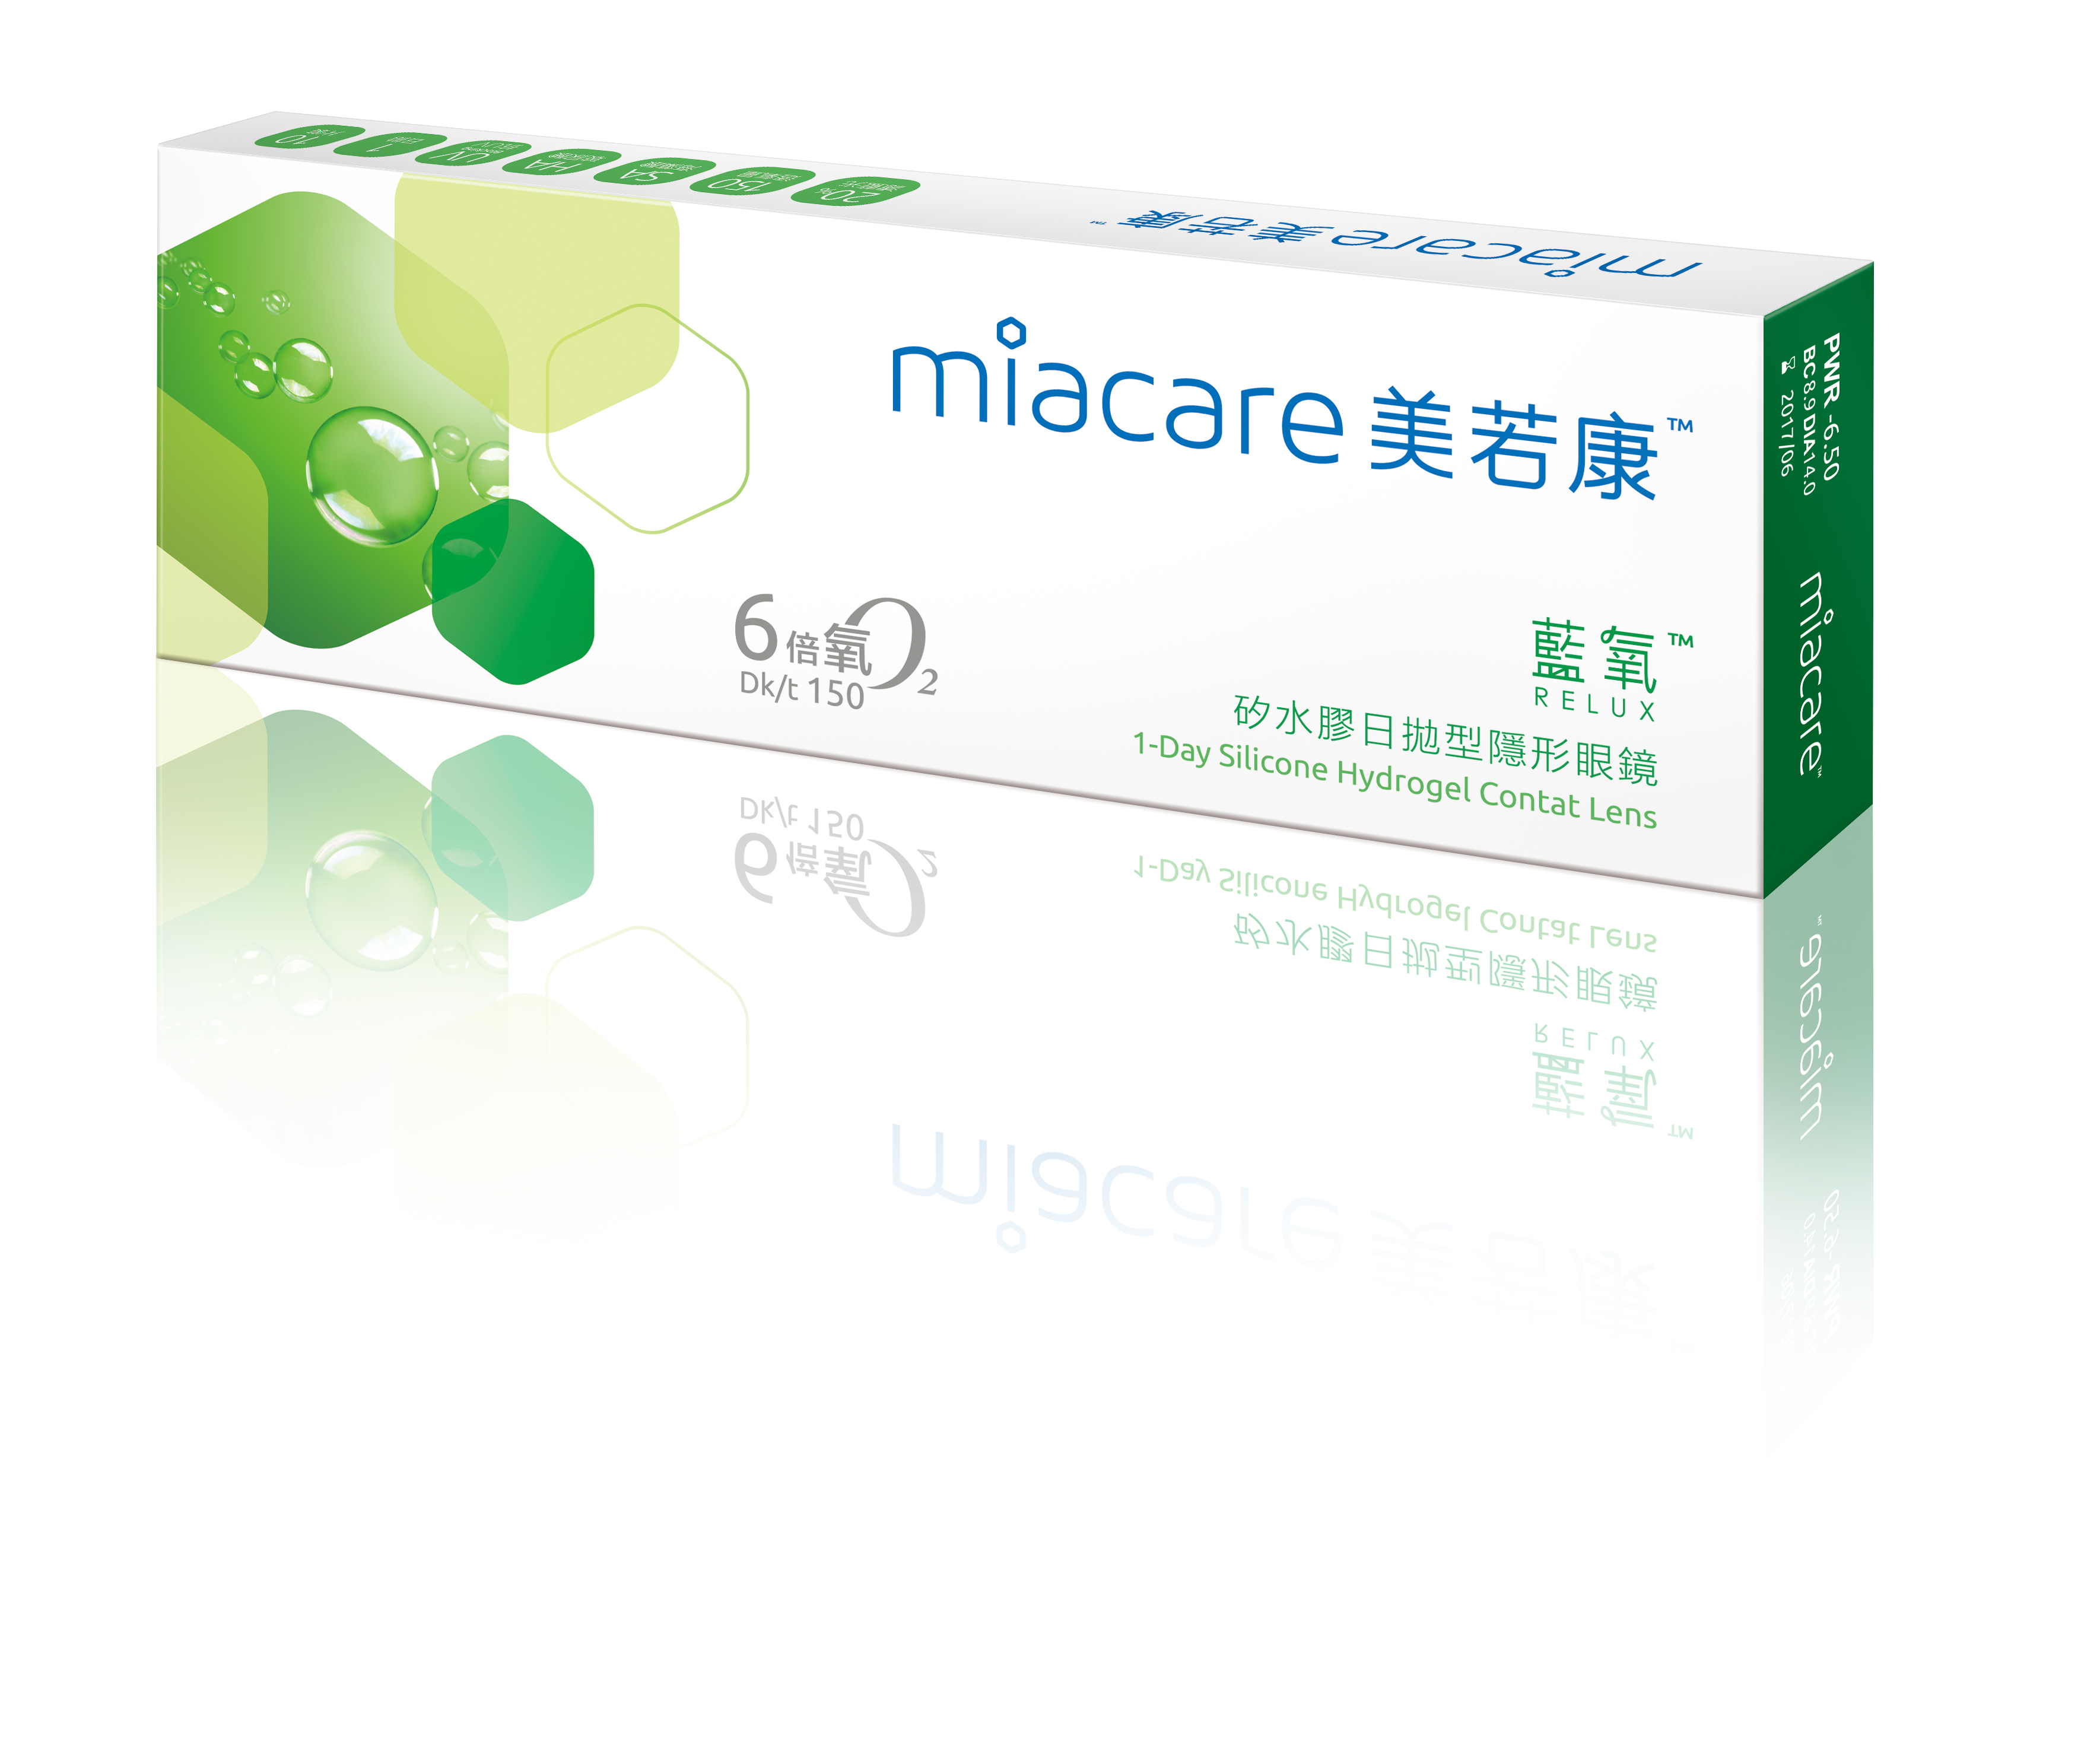 Miacare Relux Silicone Hydrogel Daily Soft Contact Lens / BenQ Materials Corp.